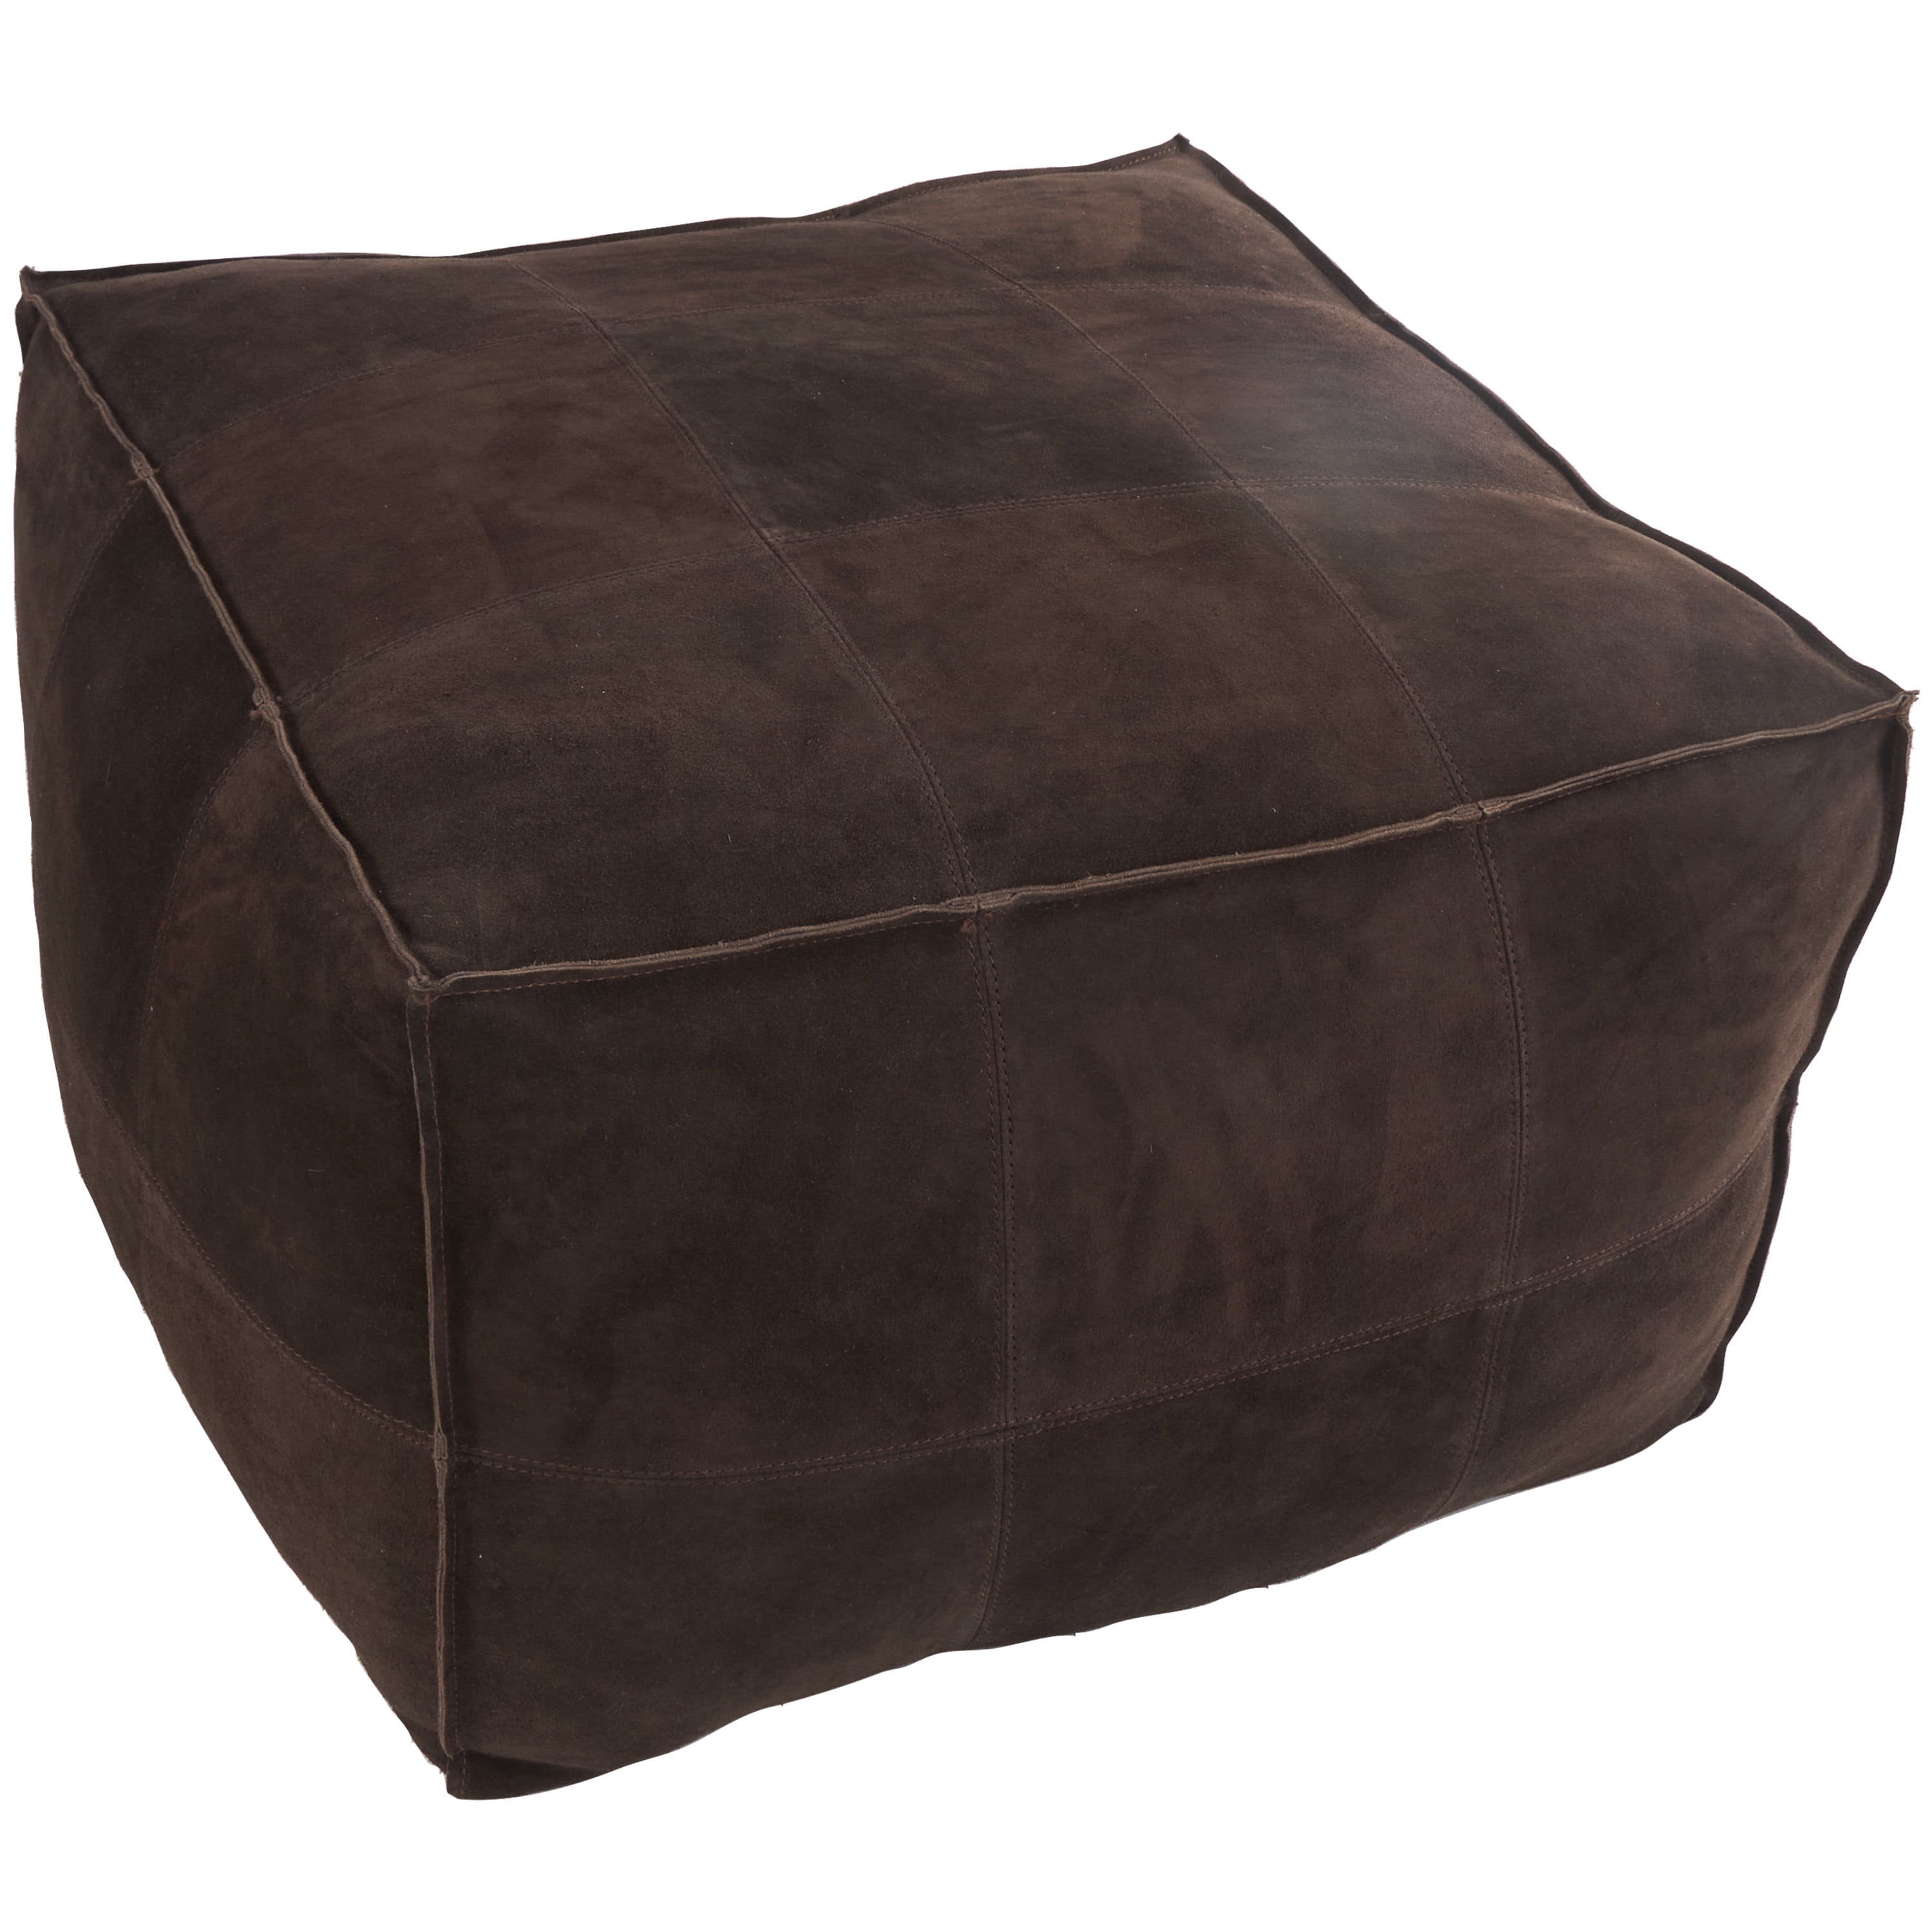 Genuine Cowhide Leather Pouffe Ottoman Pouf Footrest without Bean/Filler  Brown